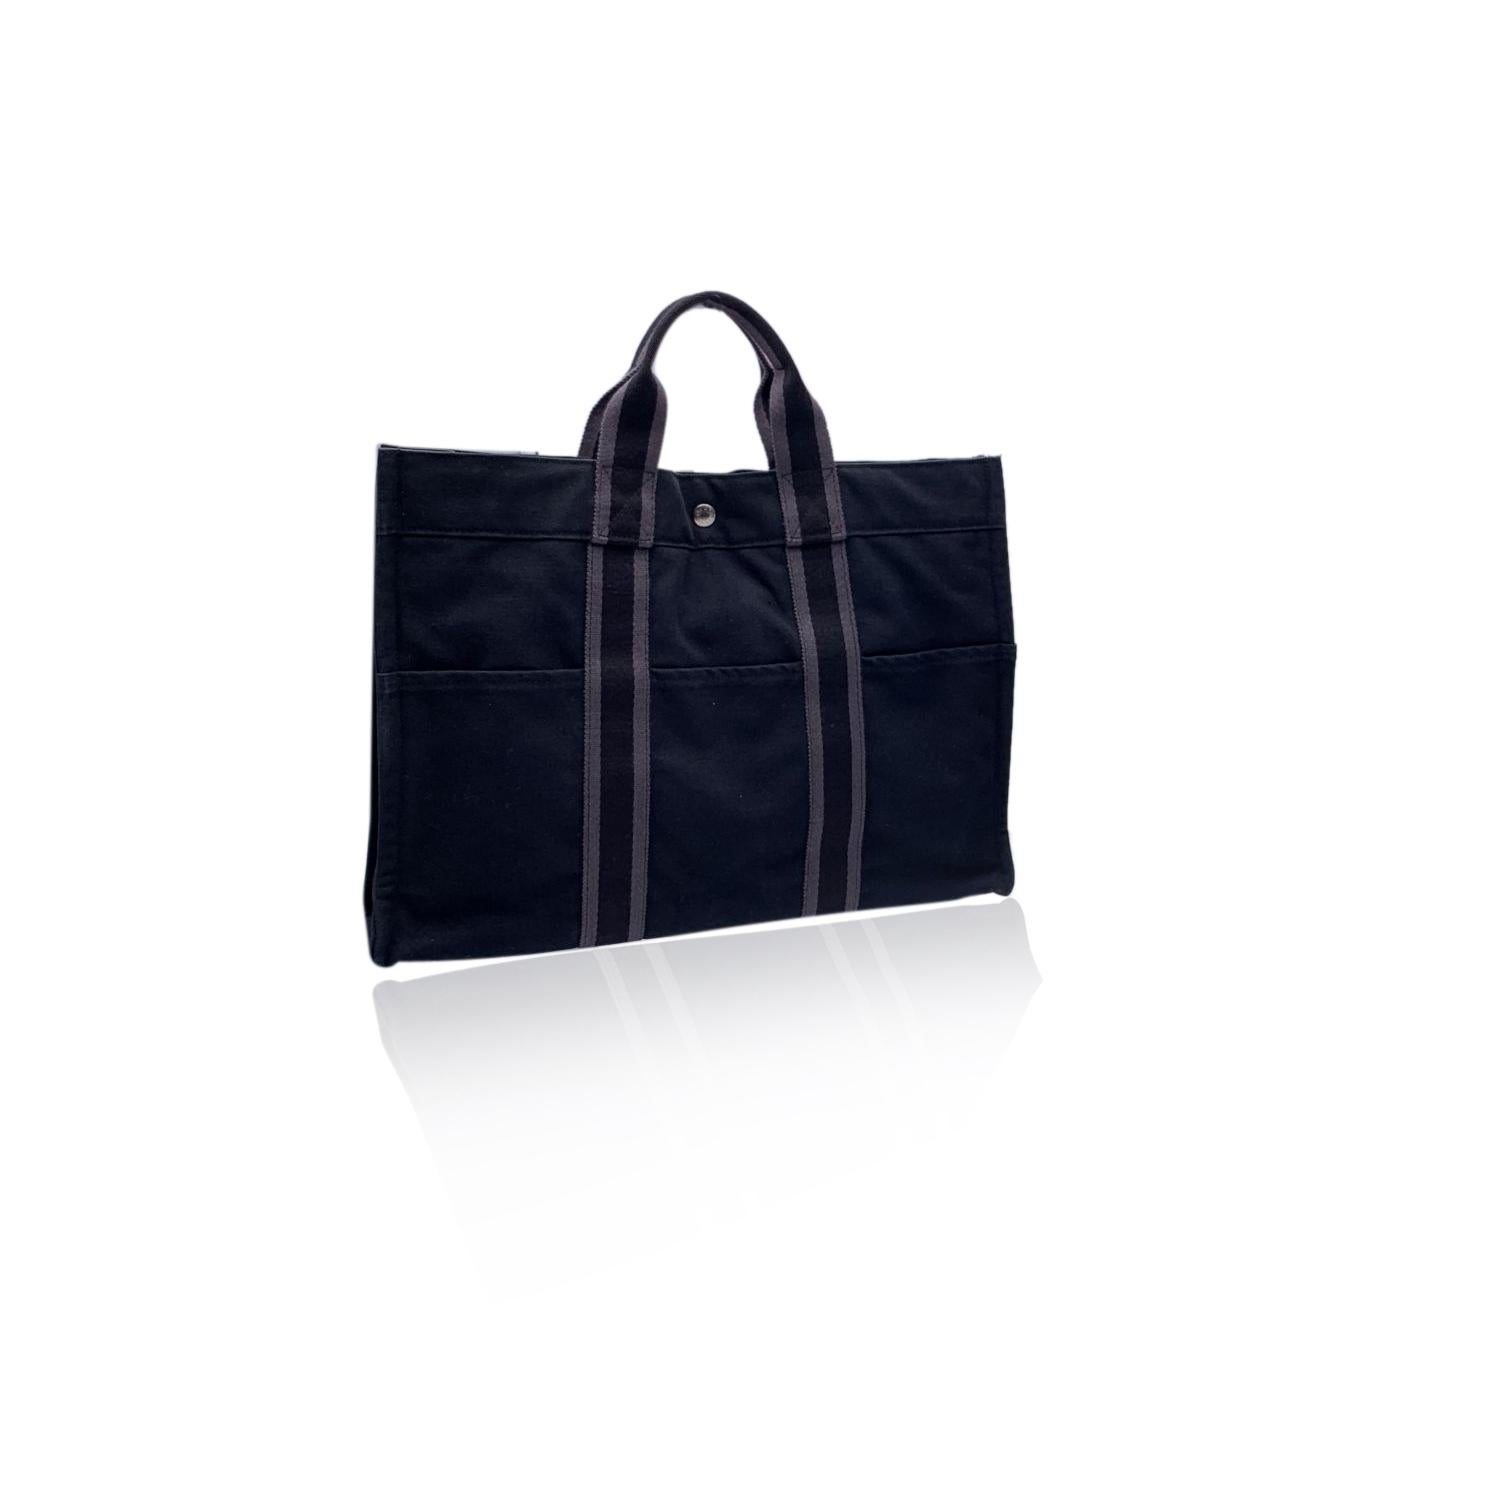  'HERMES FOURRE TOUT - MM' - Tote handbag. Made in France. Black color with grey stripes. Material: 100% cotton. It has snaps on both ends for expansion. Durable canvas  handles, perfect for casual and everyday use. 3 open pockets on the front and 3